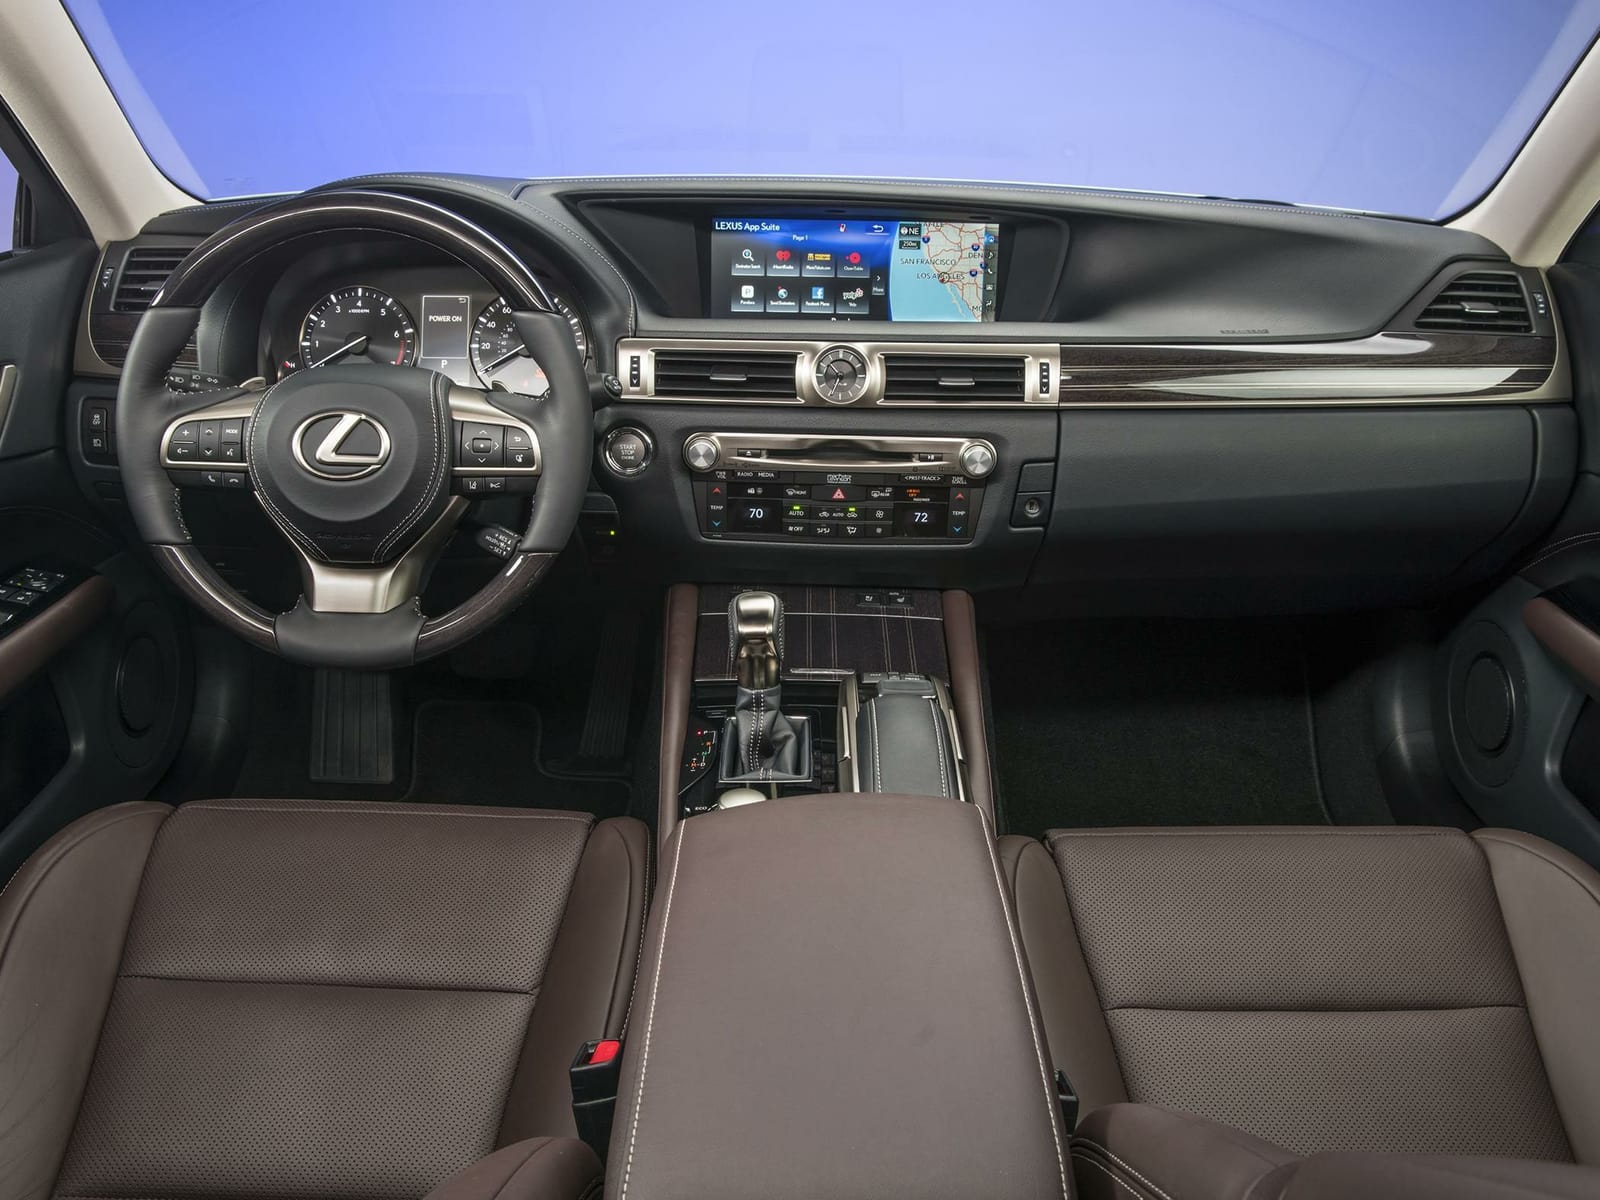 16 Lexus Gs 350 Prices Reviews Vehicle Overview Carsdirect